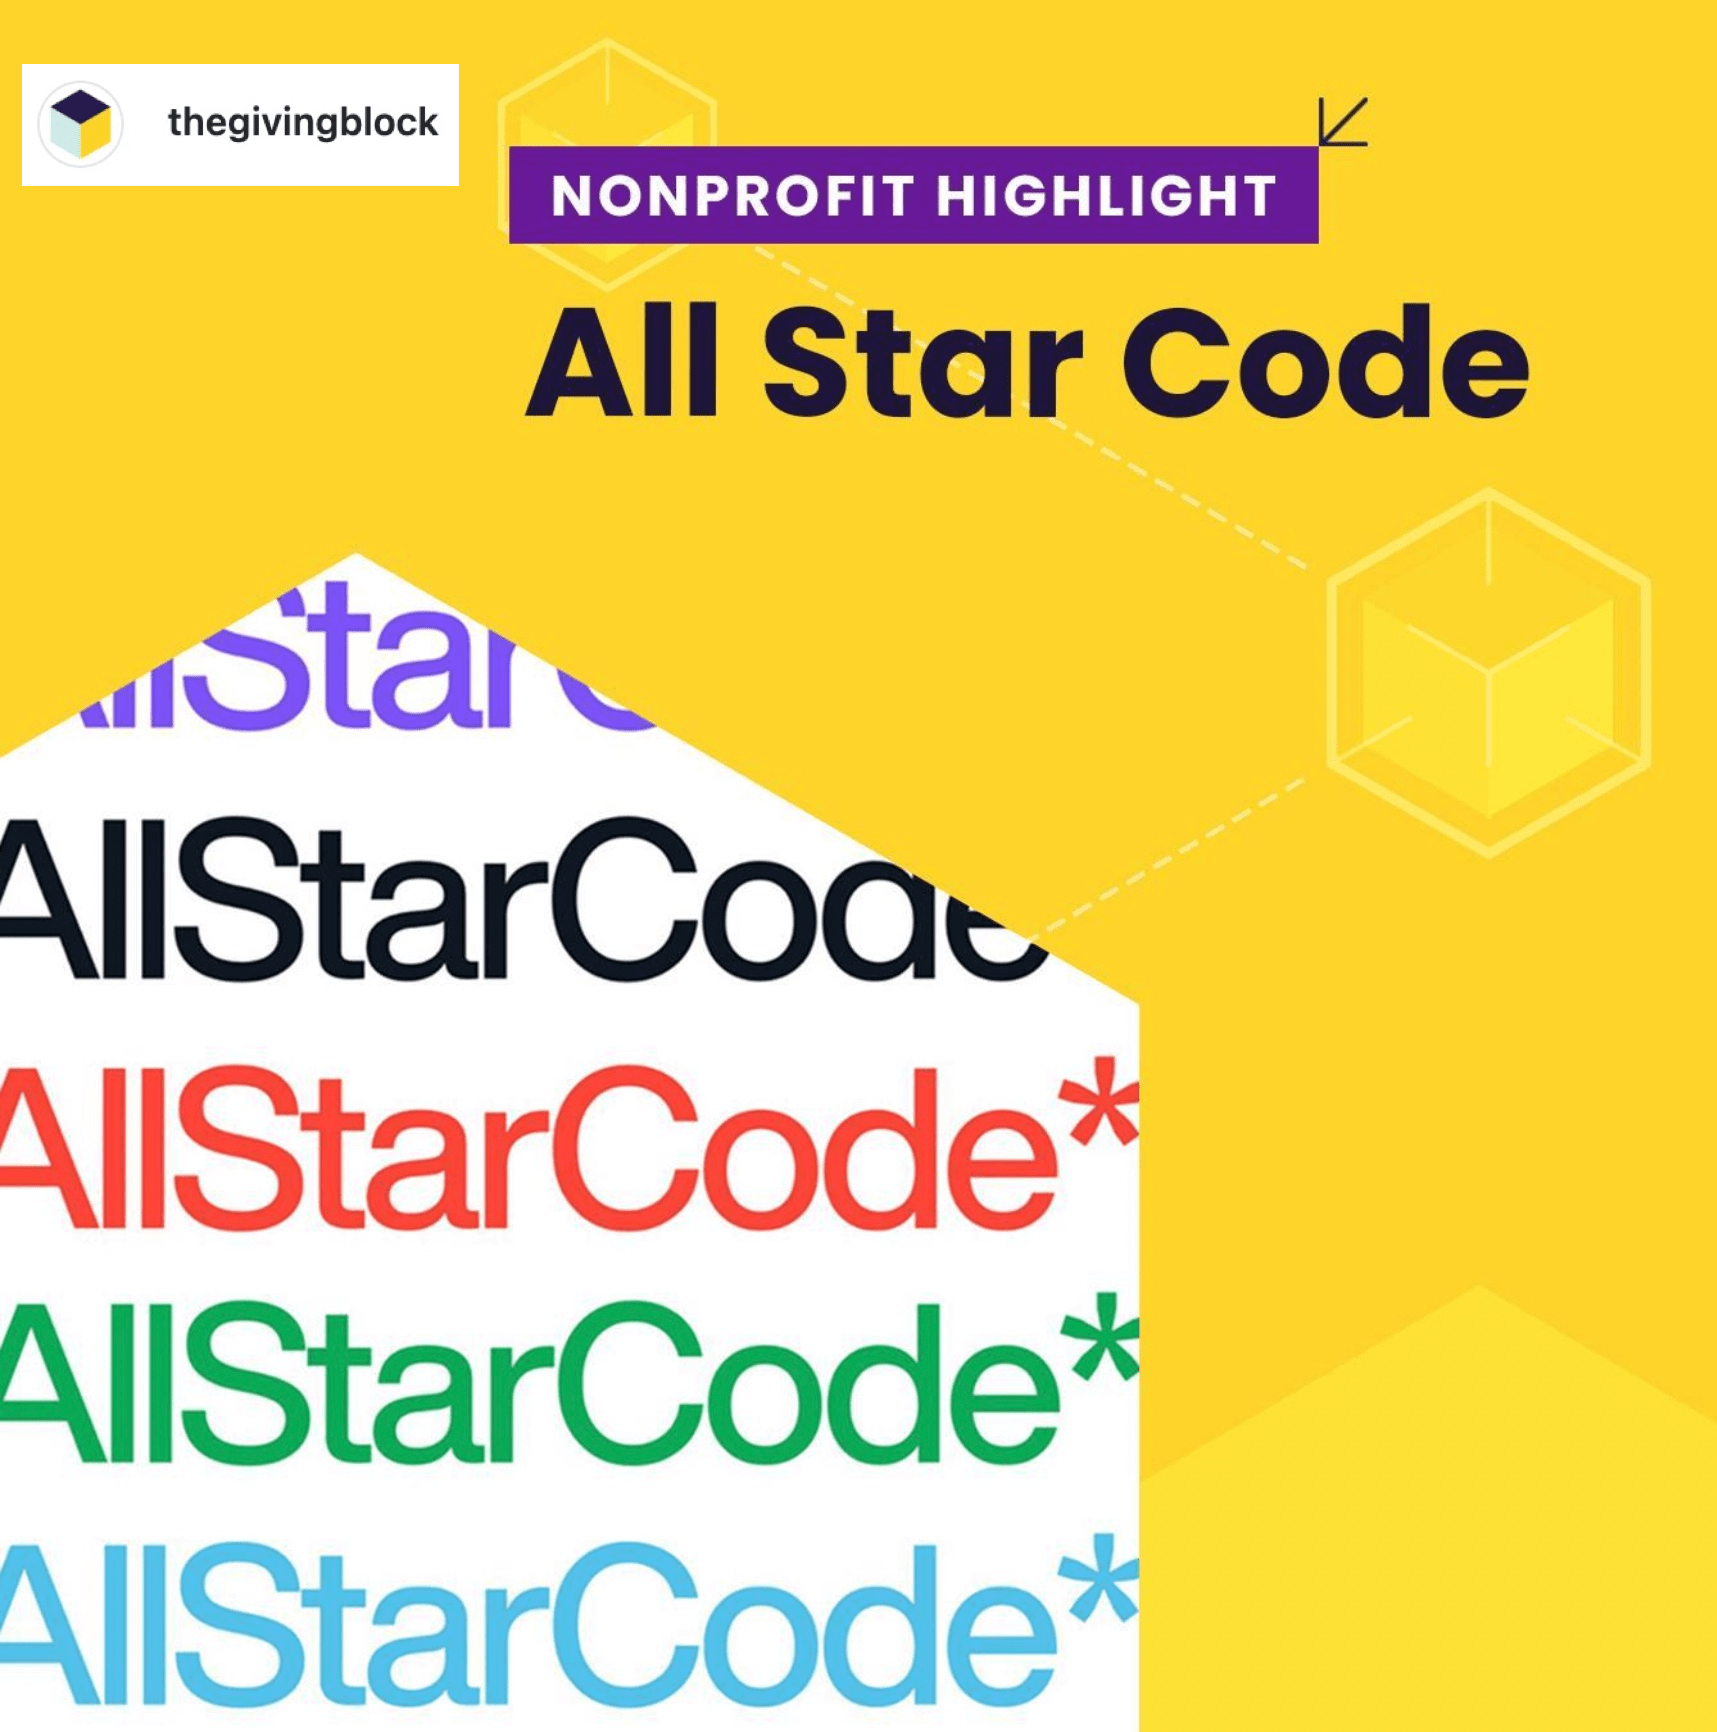 The All-Star Code Scholar Benefit Raised $370,000 for Its